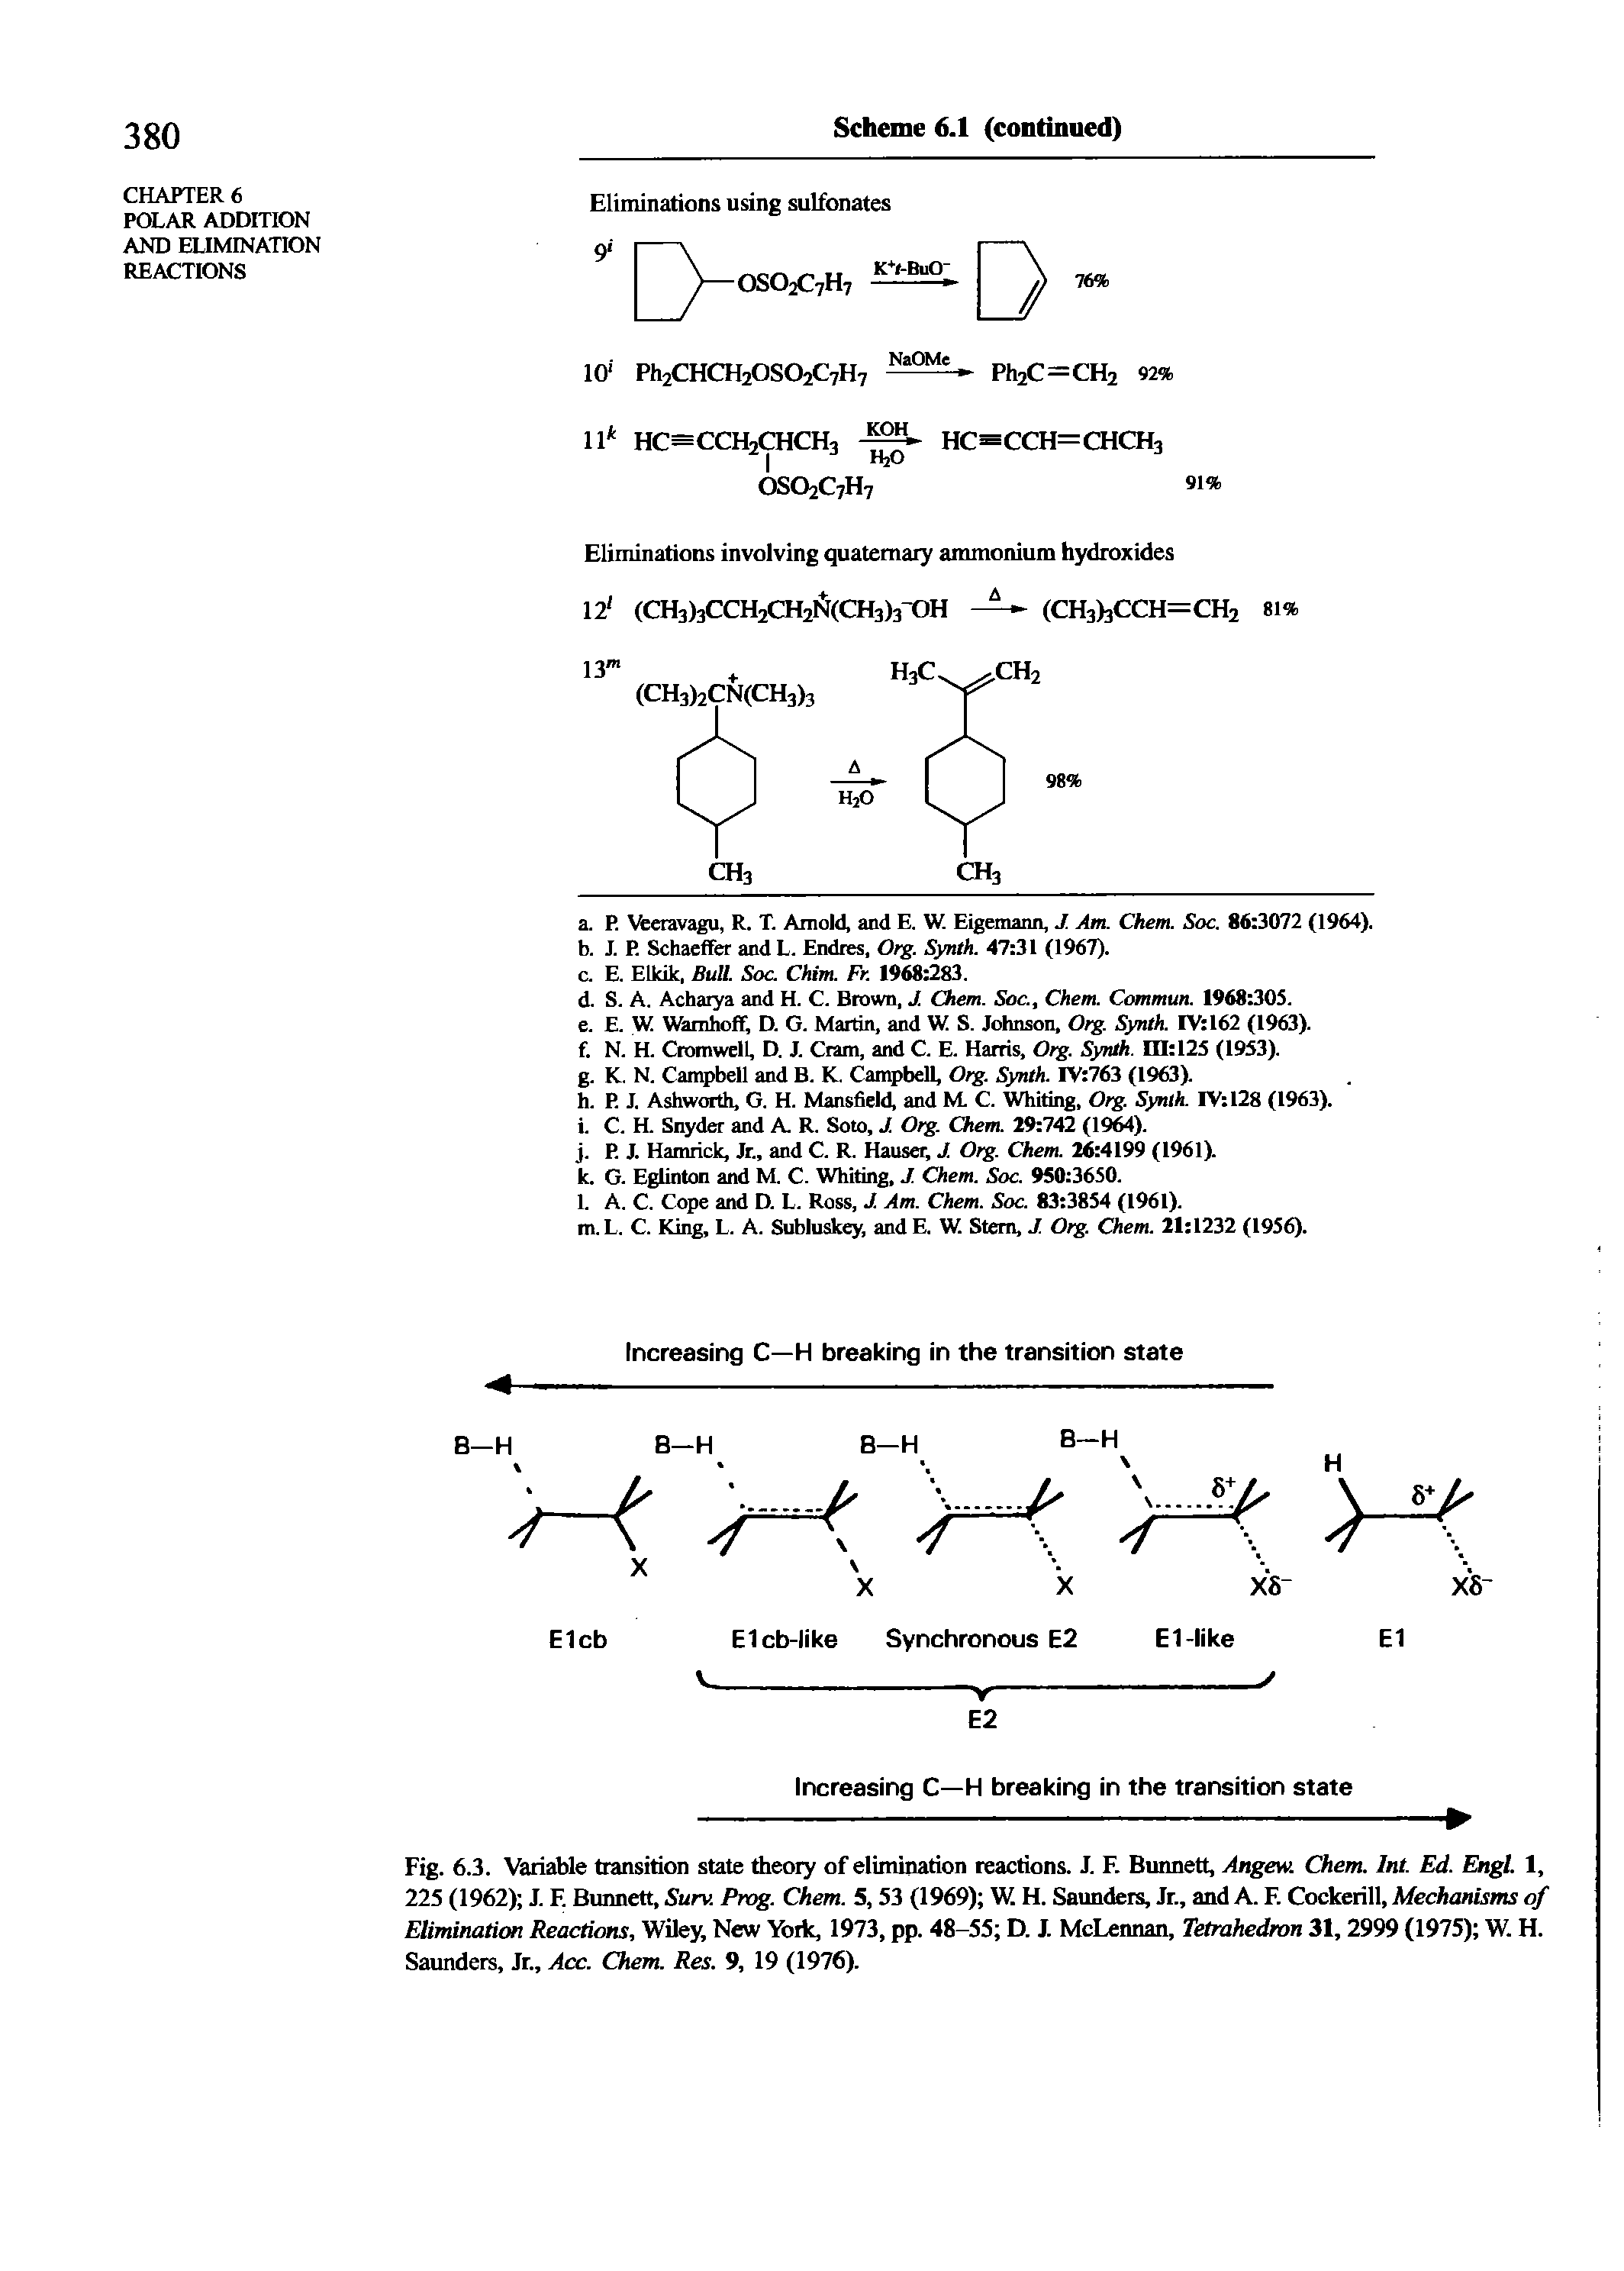 Fig. 6.3. Variable transition state theoiy of elimination reactions. J. F. Bunnett, Angew. Chem. Int. Ed. Engl. 1, 225 (1962) J. F. Bunnett, Surv. Prog. Chem. 5, 53 (1969) W. H. Saunders, Jr., and A. F. Cockerill, Mechanisms of Elimination Reactions, Wiley, New York, 1973, pp. 48—55 D. J. McLennan, Tetrahedron 31, 2999 (1975) W. H. Saunders, Jr., Acc. Chem. Res. 9, 19 (1976).